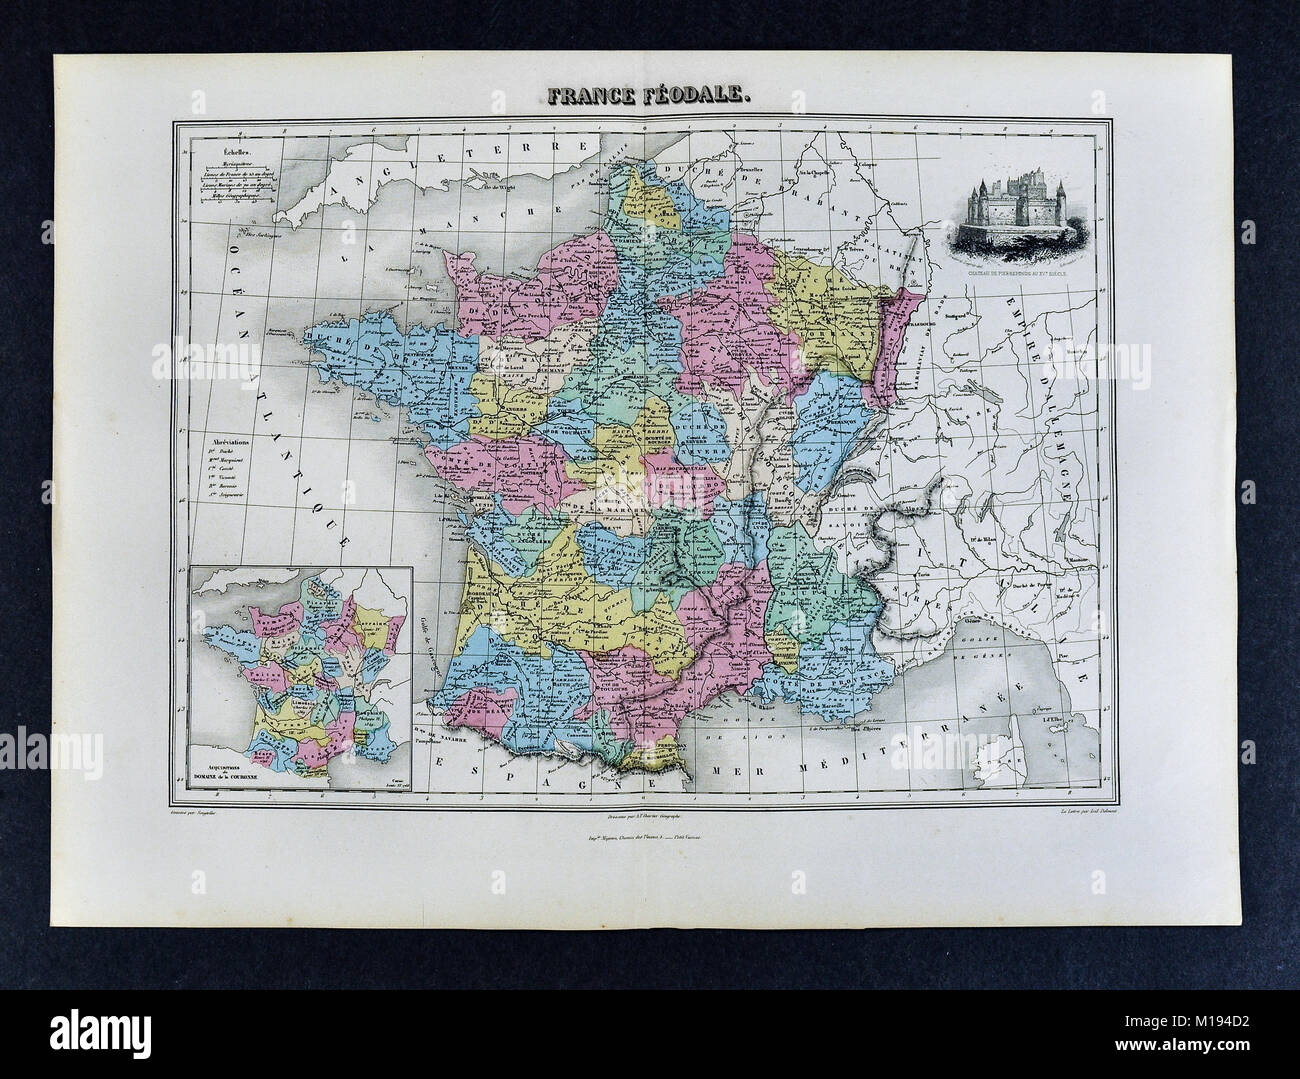 1877 Migeon Map - Feudal France - Paris Stock Photo